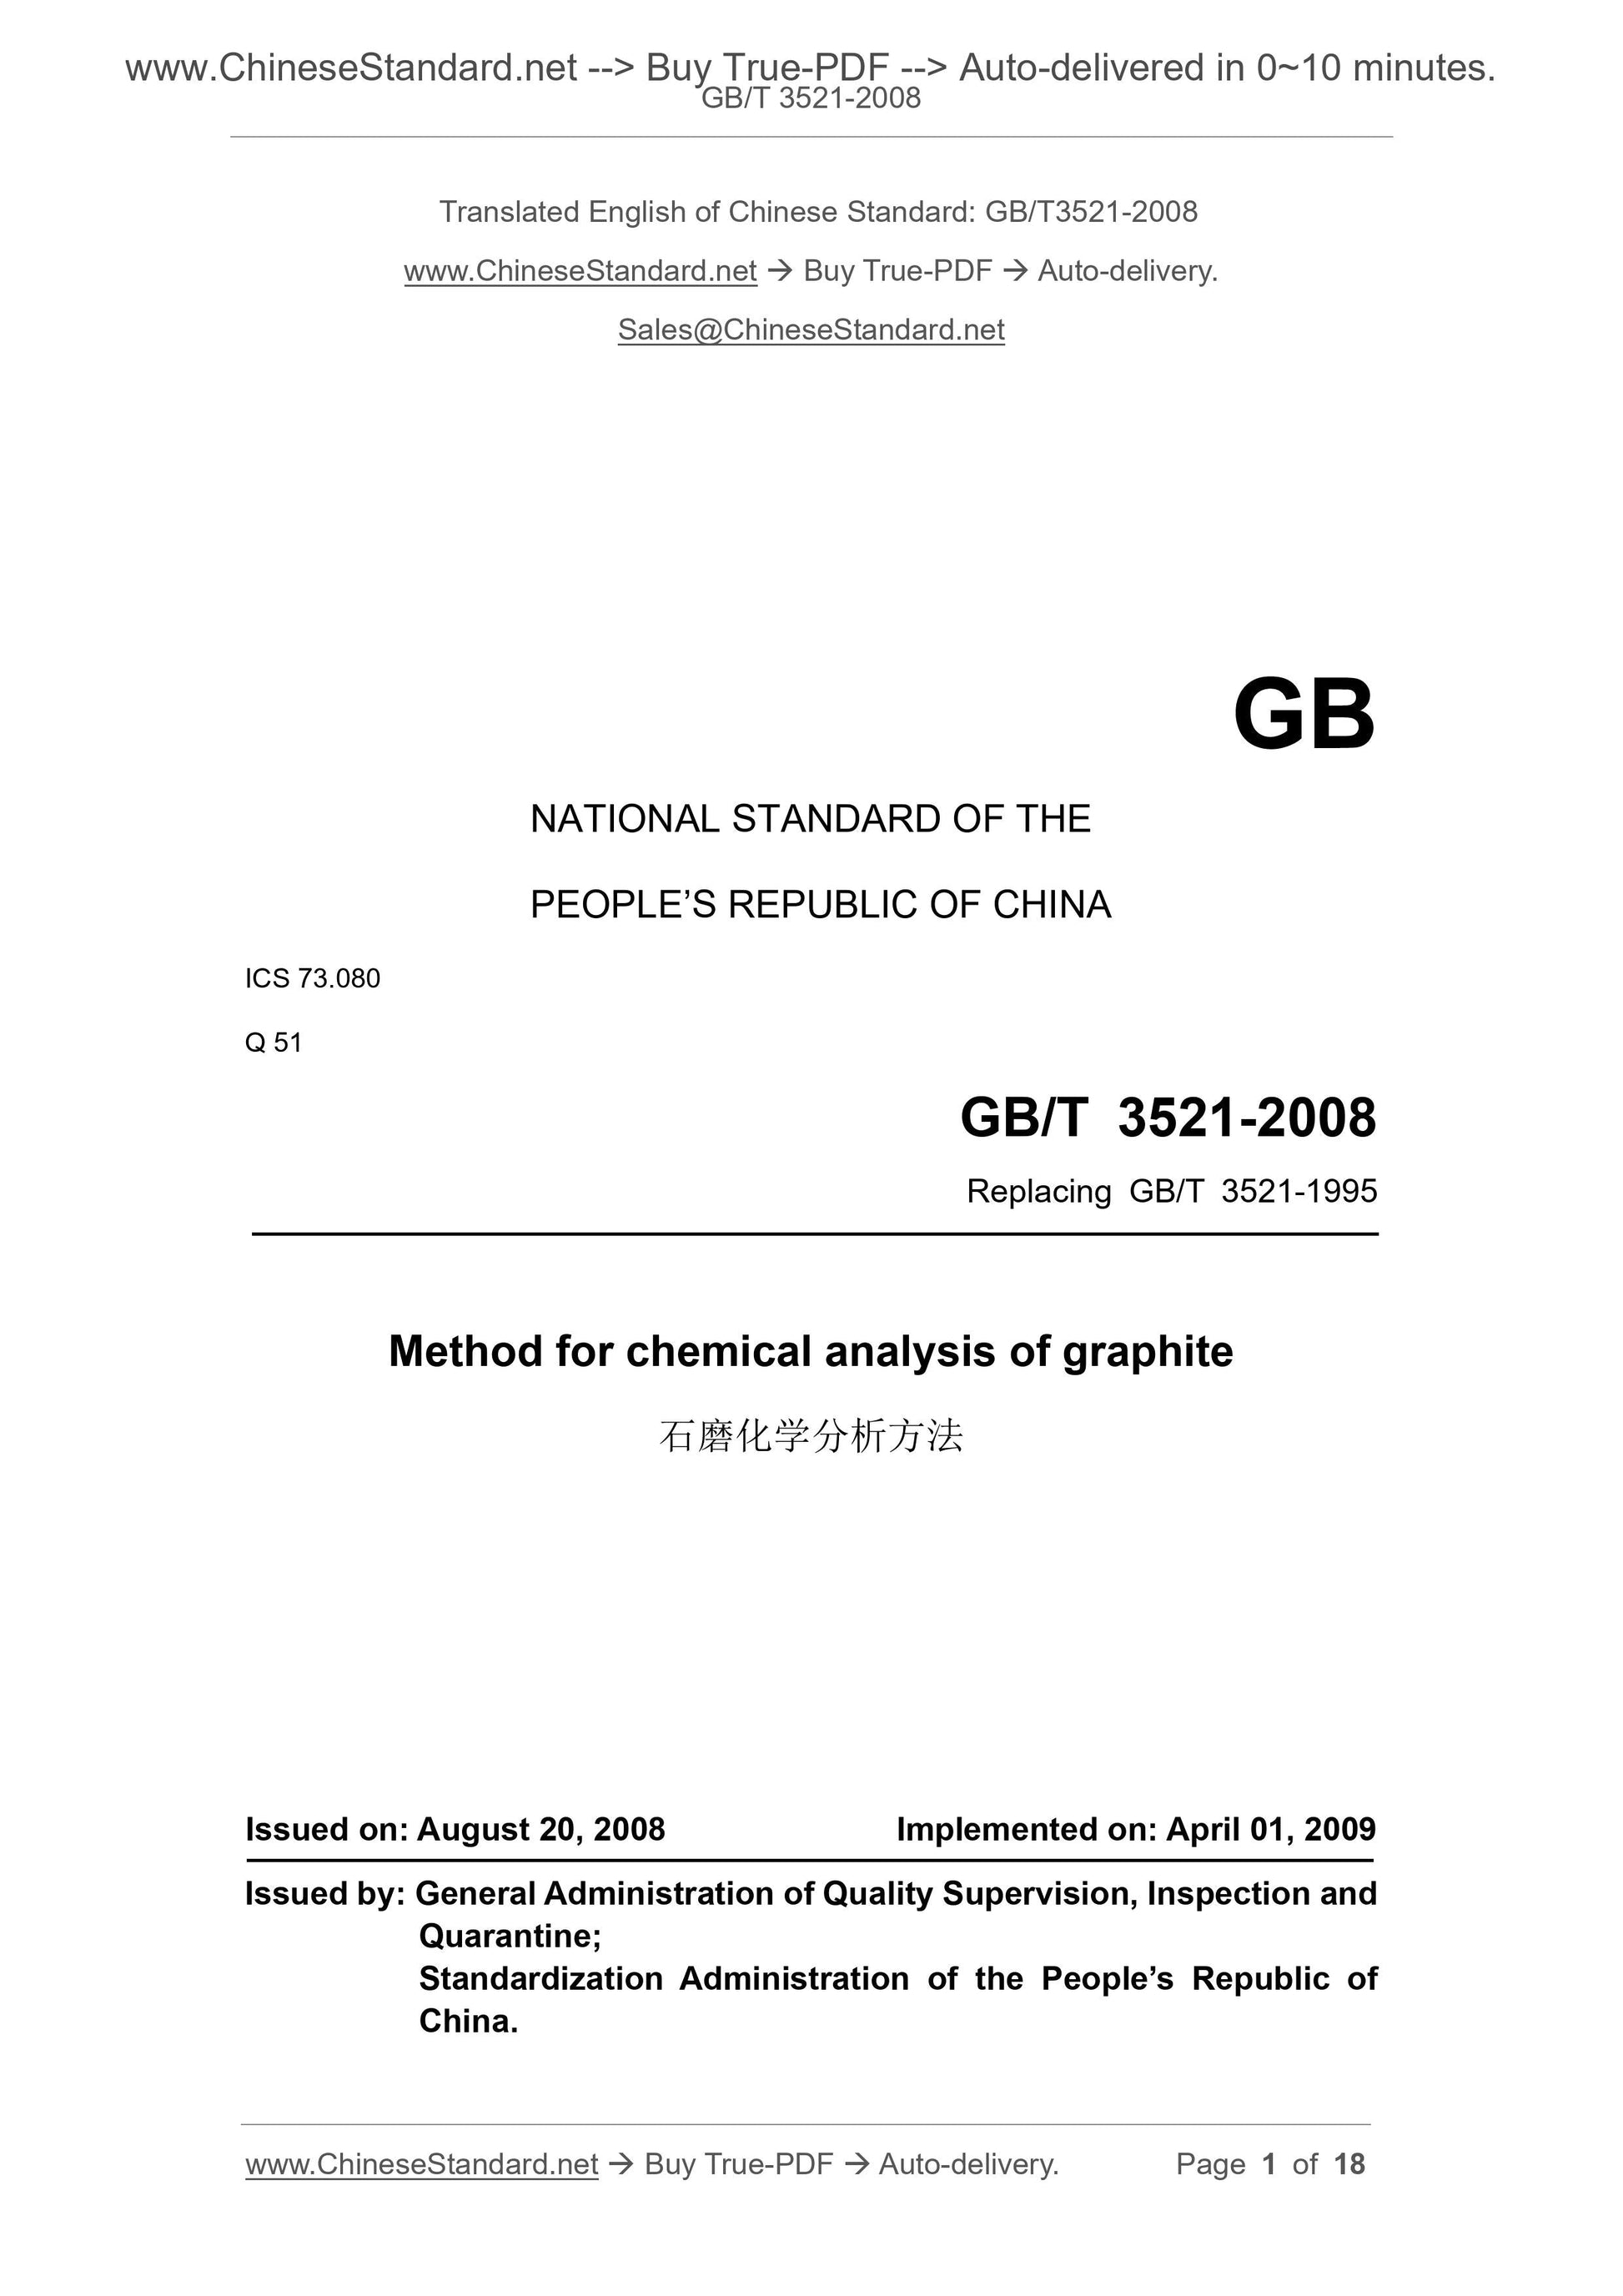 GB/T 3521-2008 Page 1